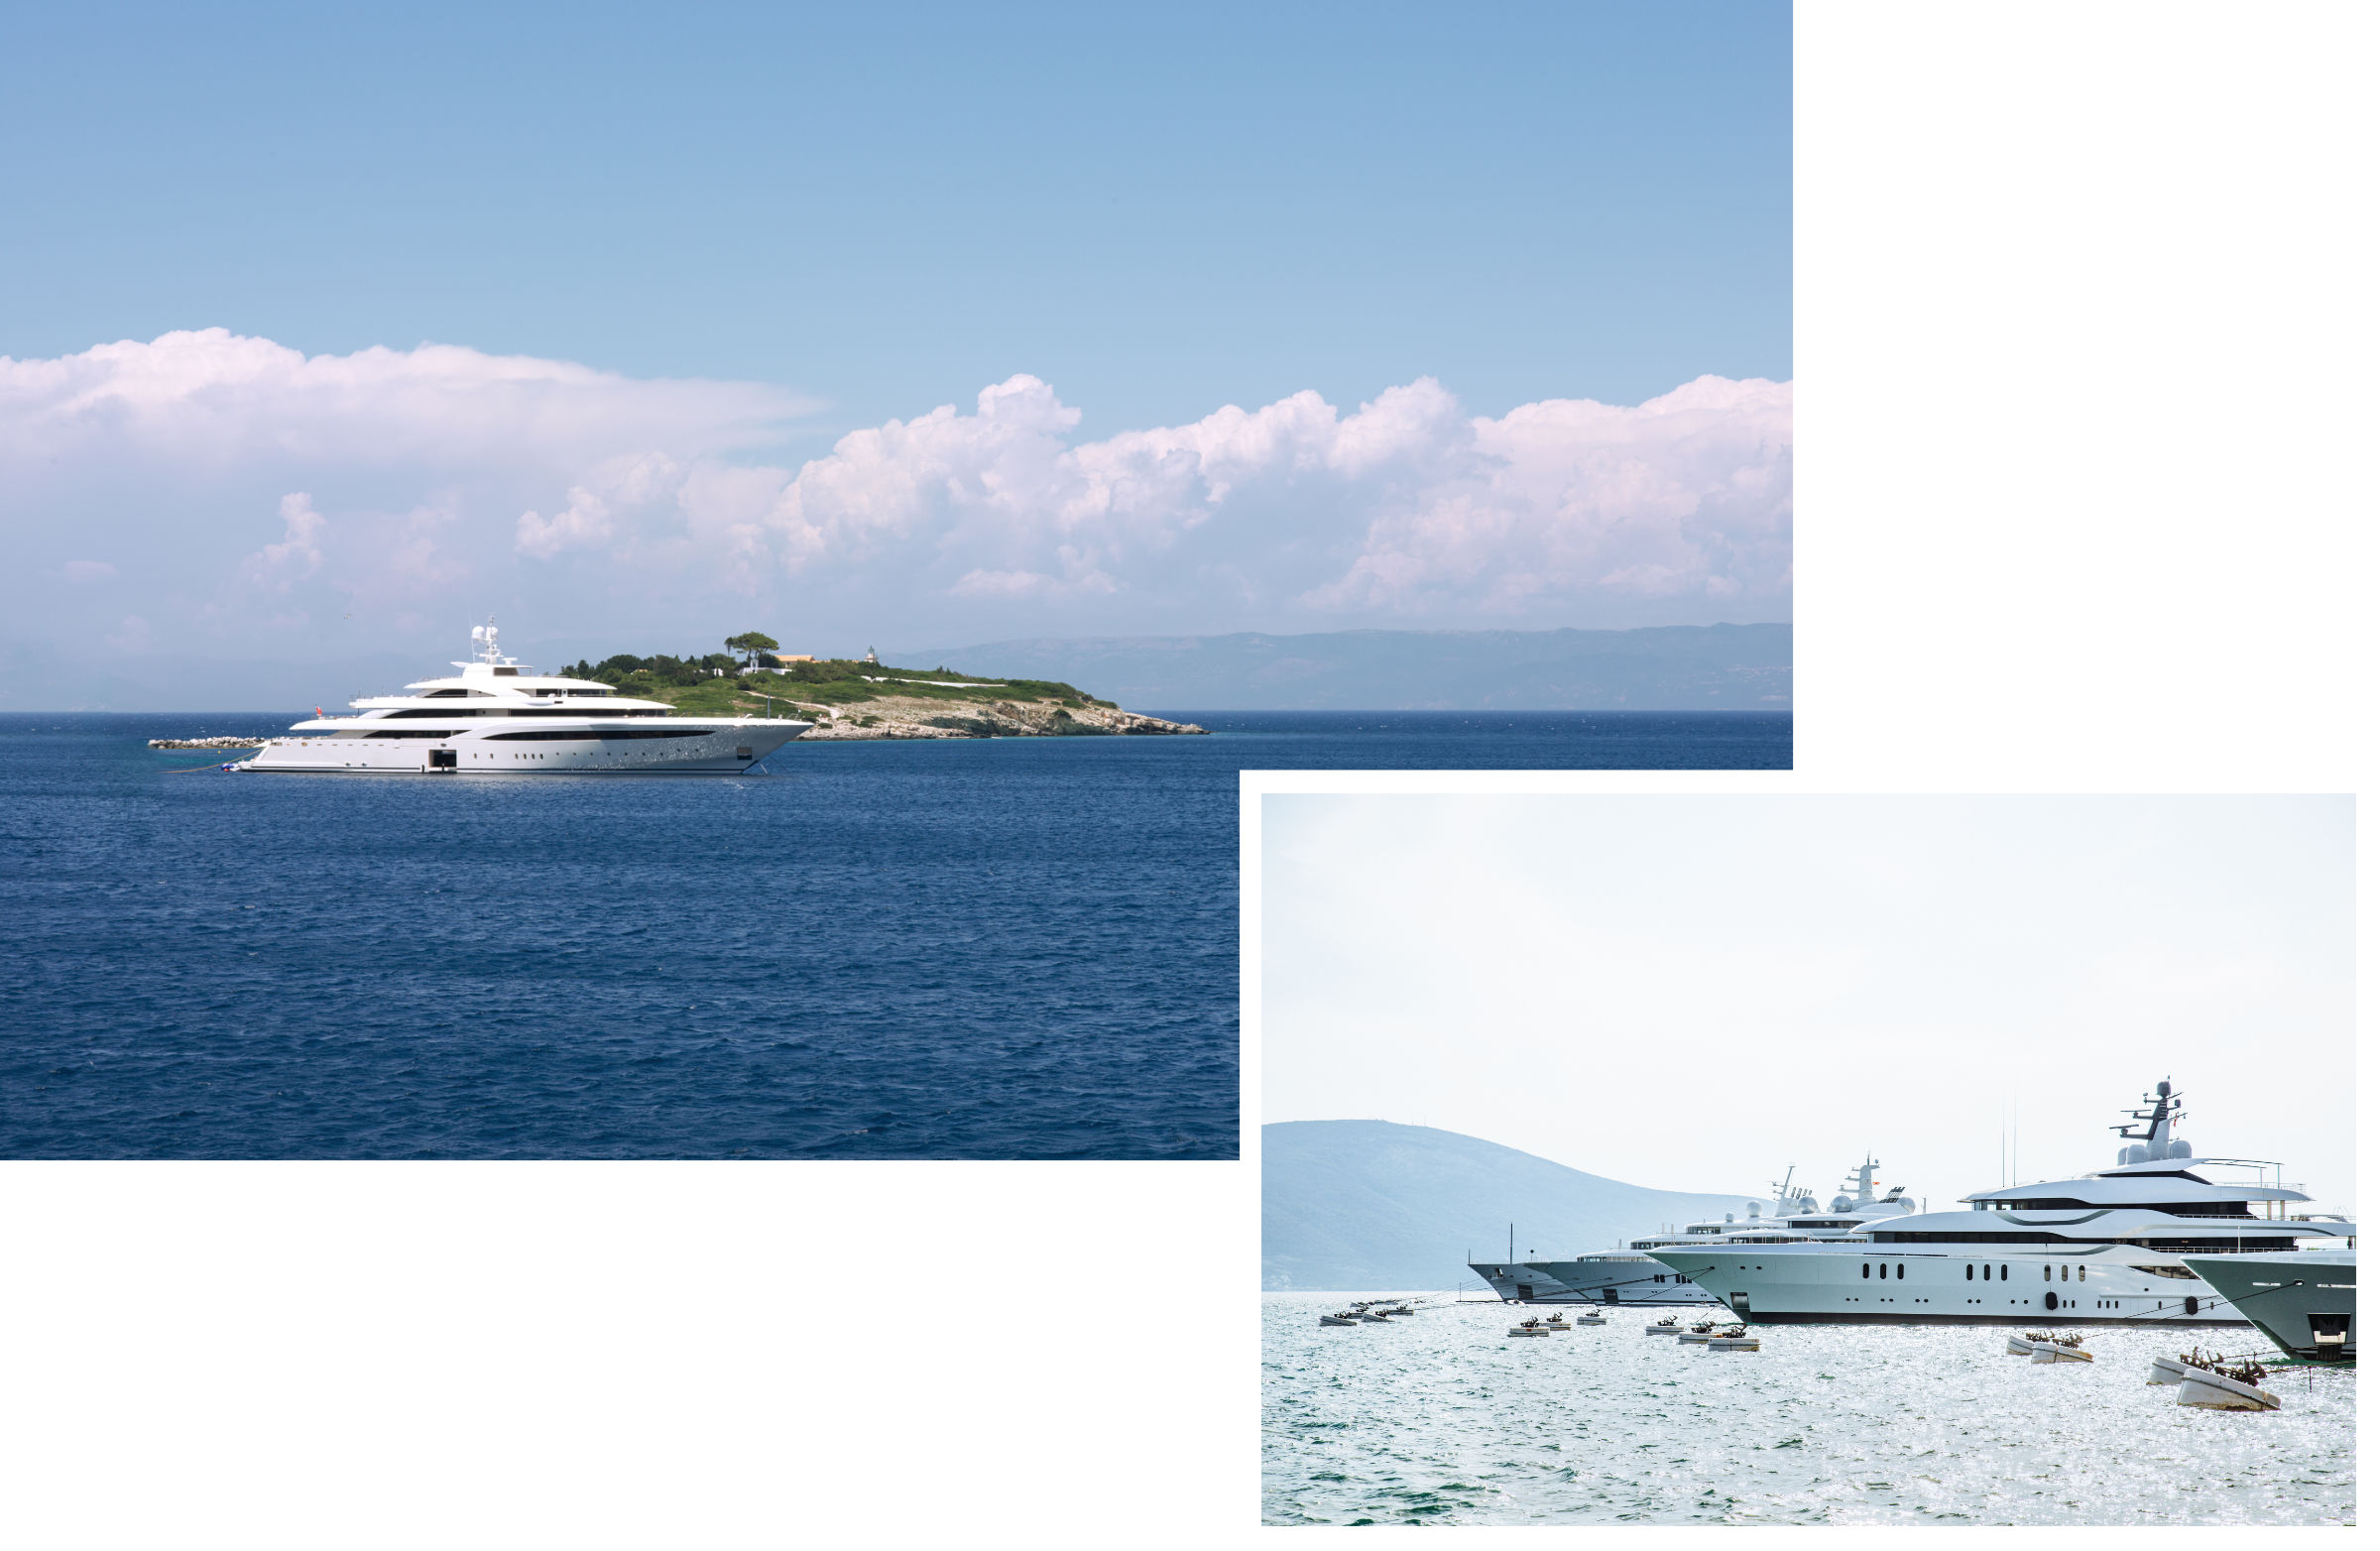 A luxurious yacht in front of an island in the sea, a few luxurious yachts surrounded by smaller boats